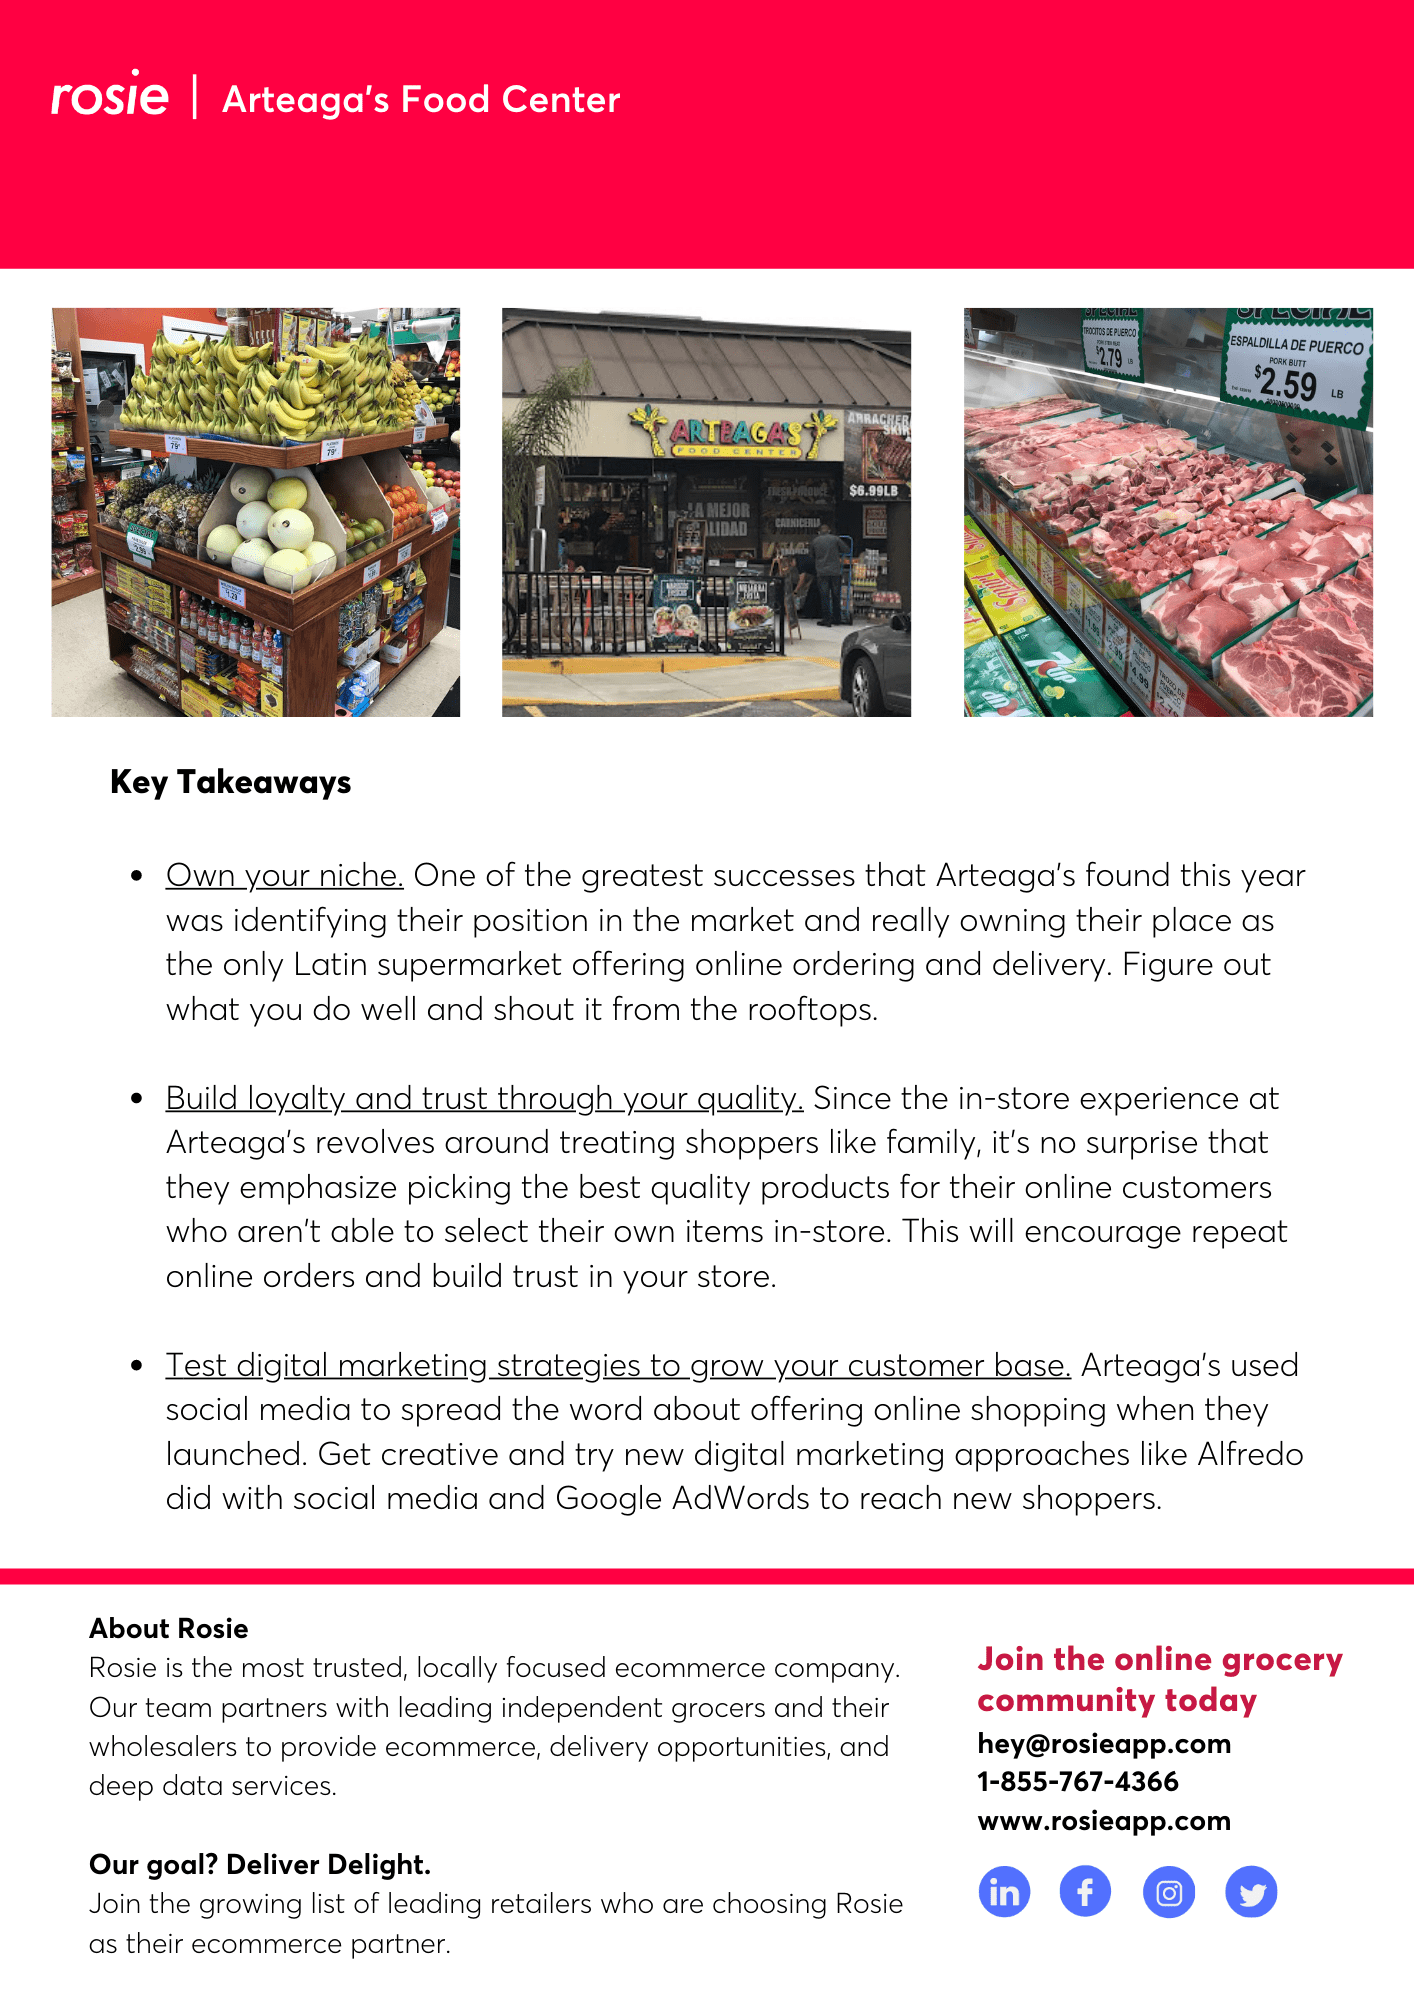 Page 2 with key takeaways for Arteaga's Food Center case study